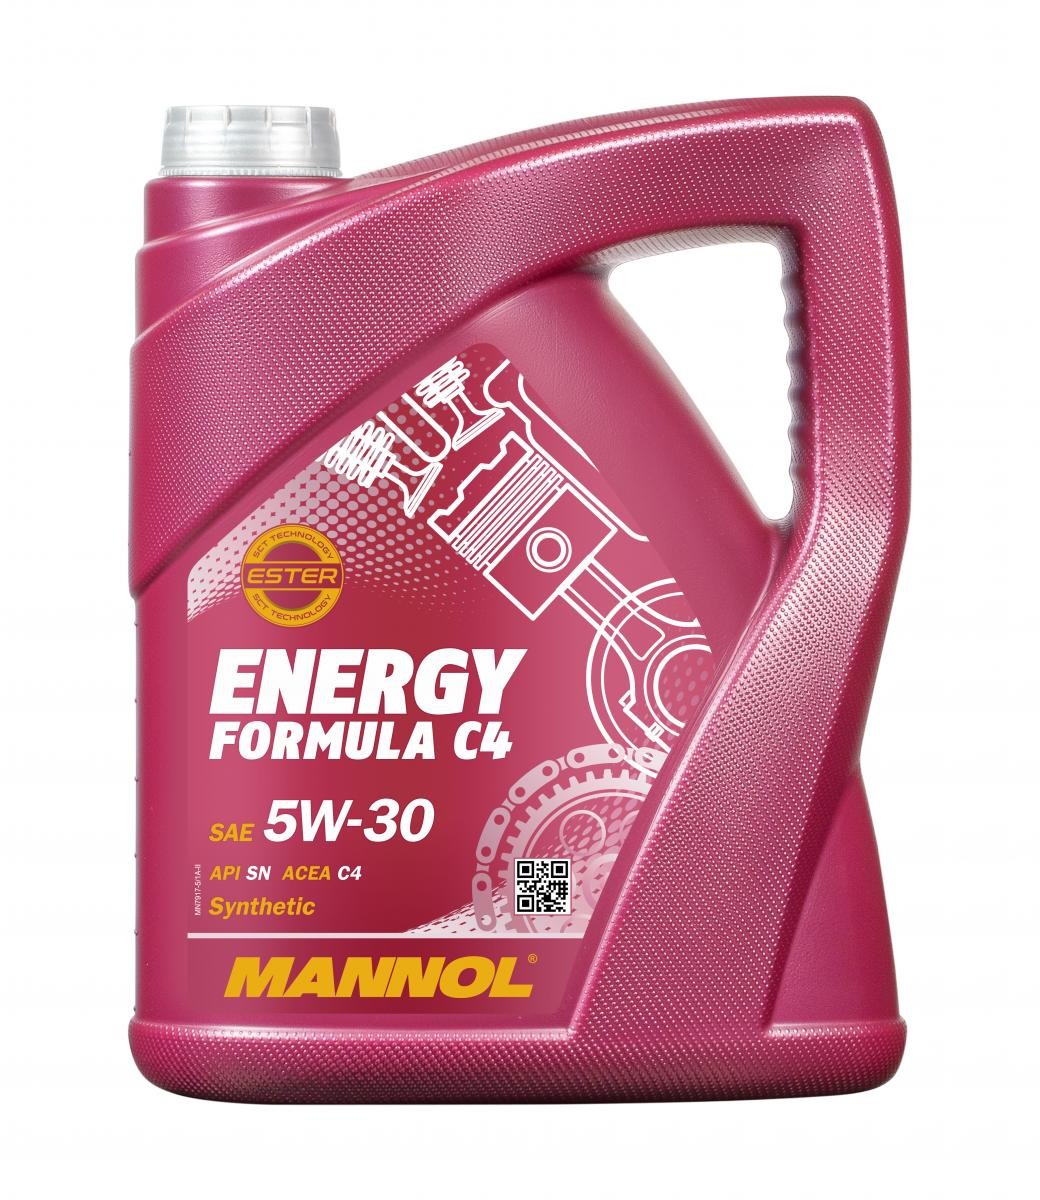 MANNOL ENERGY, FORMULA C4 MN7917-5 Engine oil 5W-30, 5l, Synthetic Oil